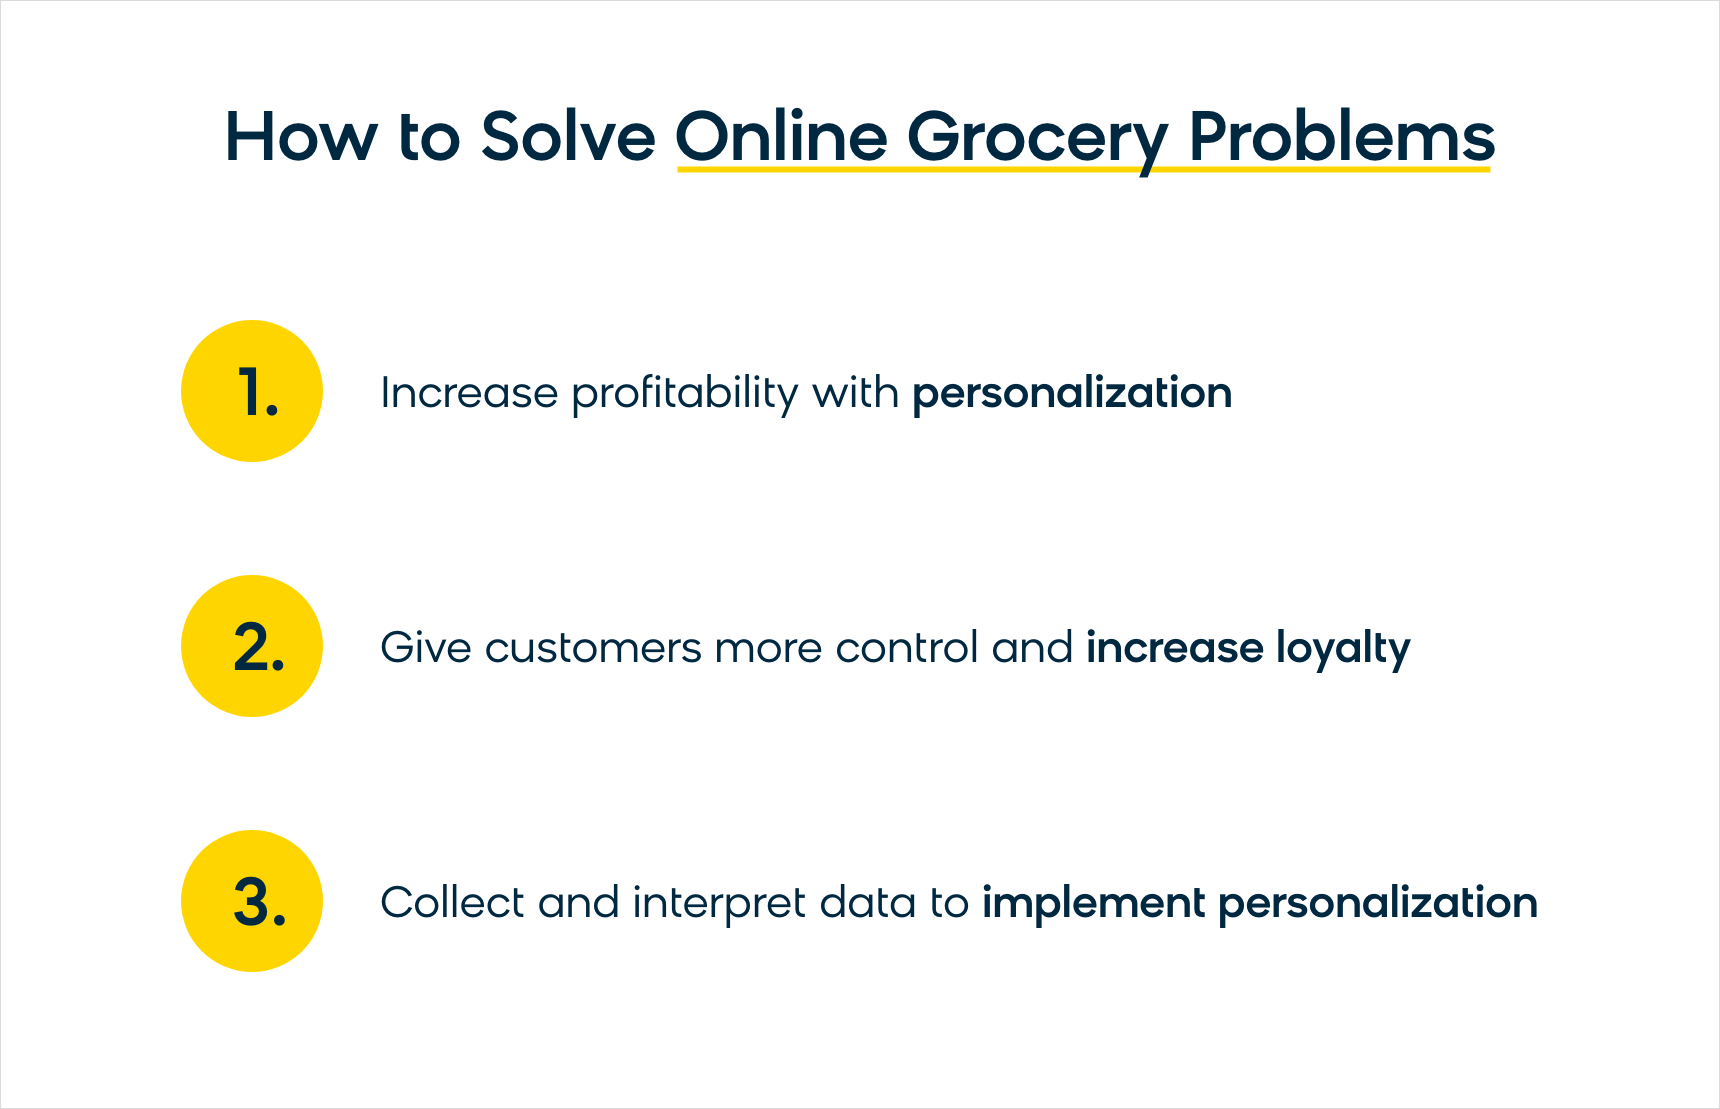 The solutions for online grocery problems: personalization, more customer control, and data collection.